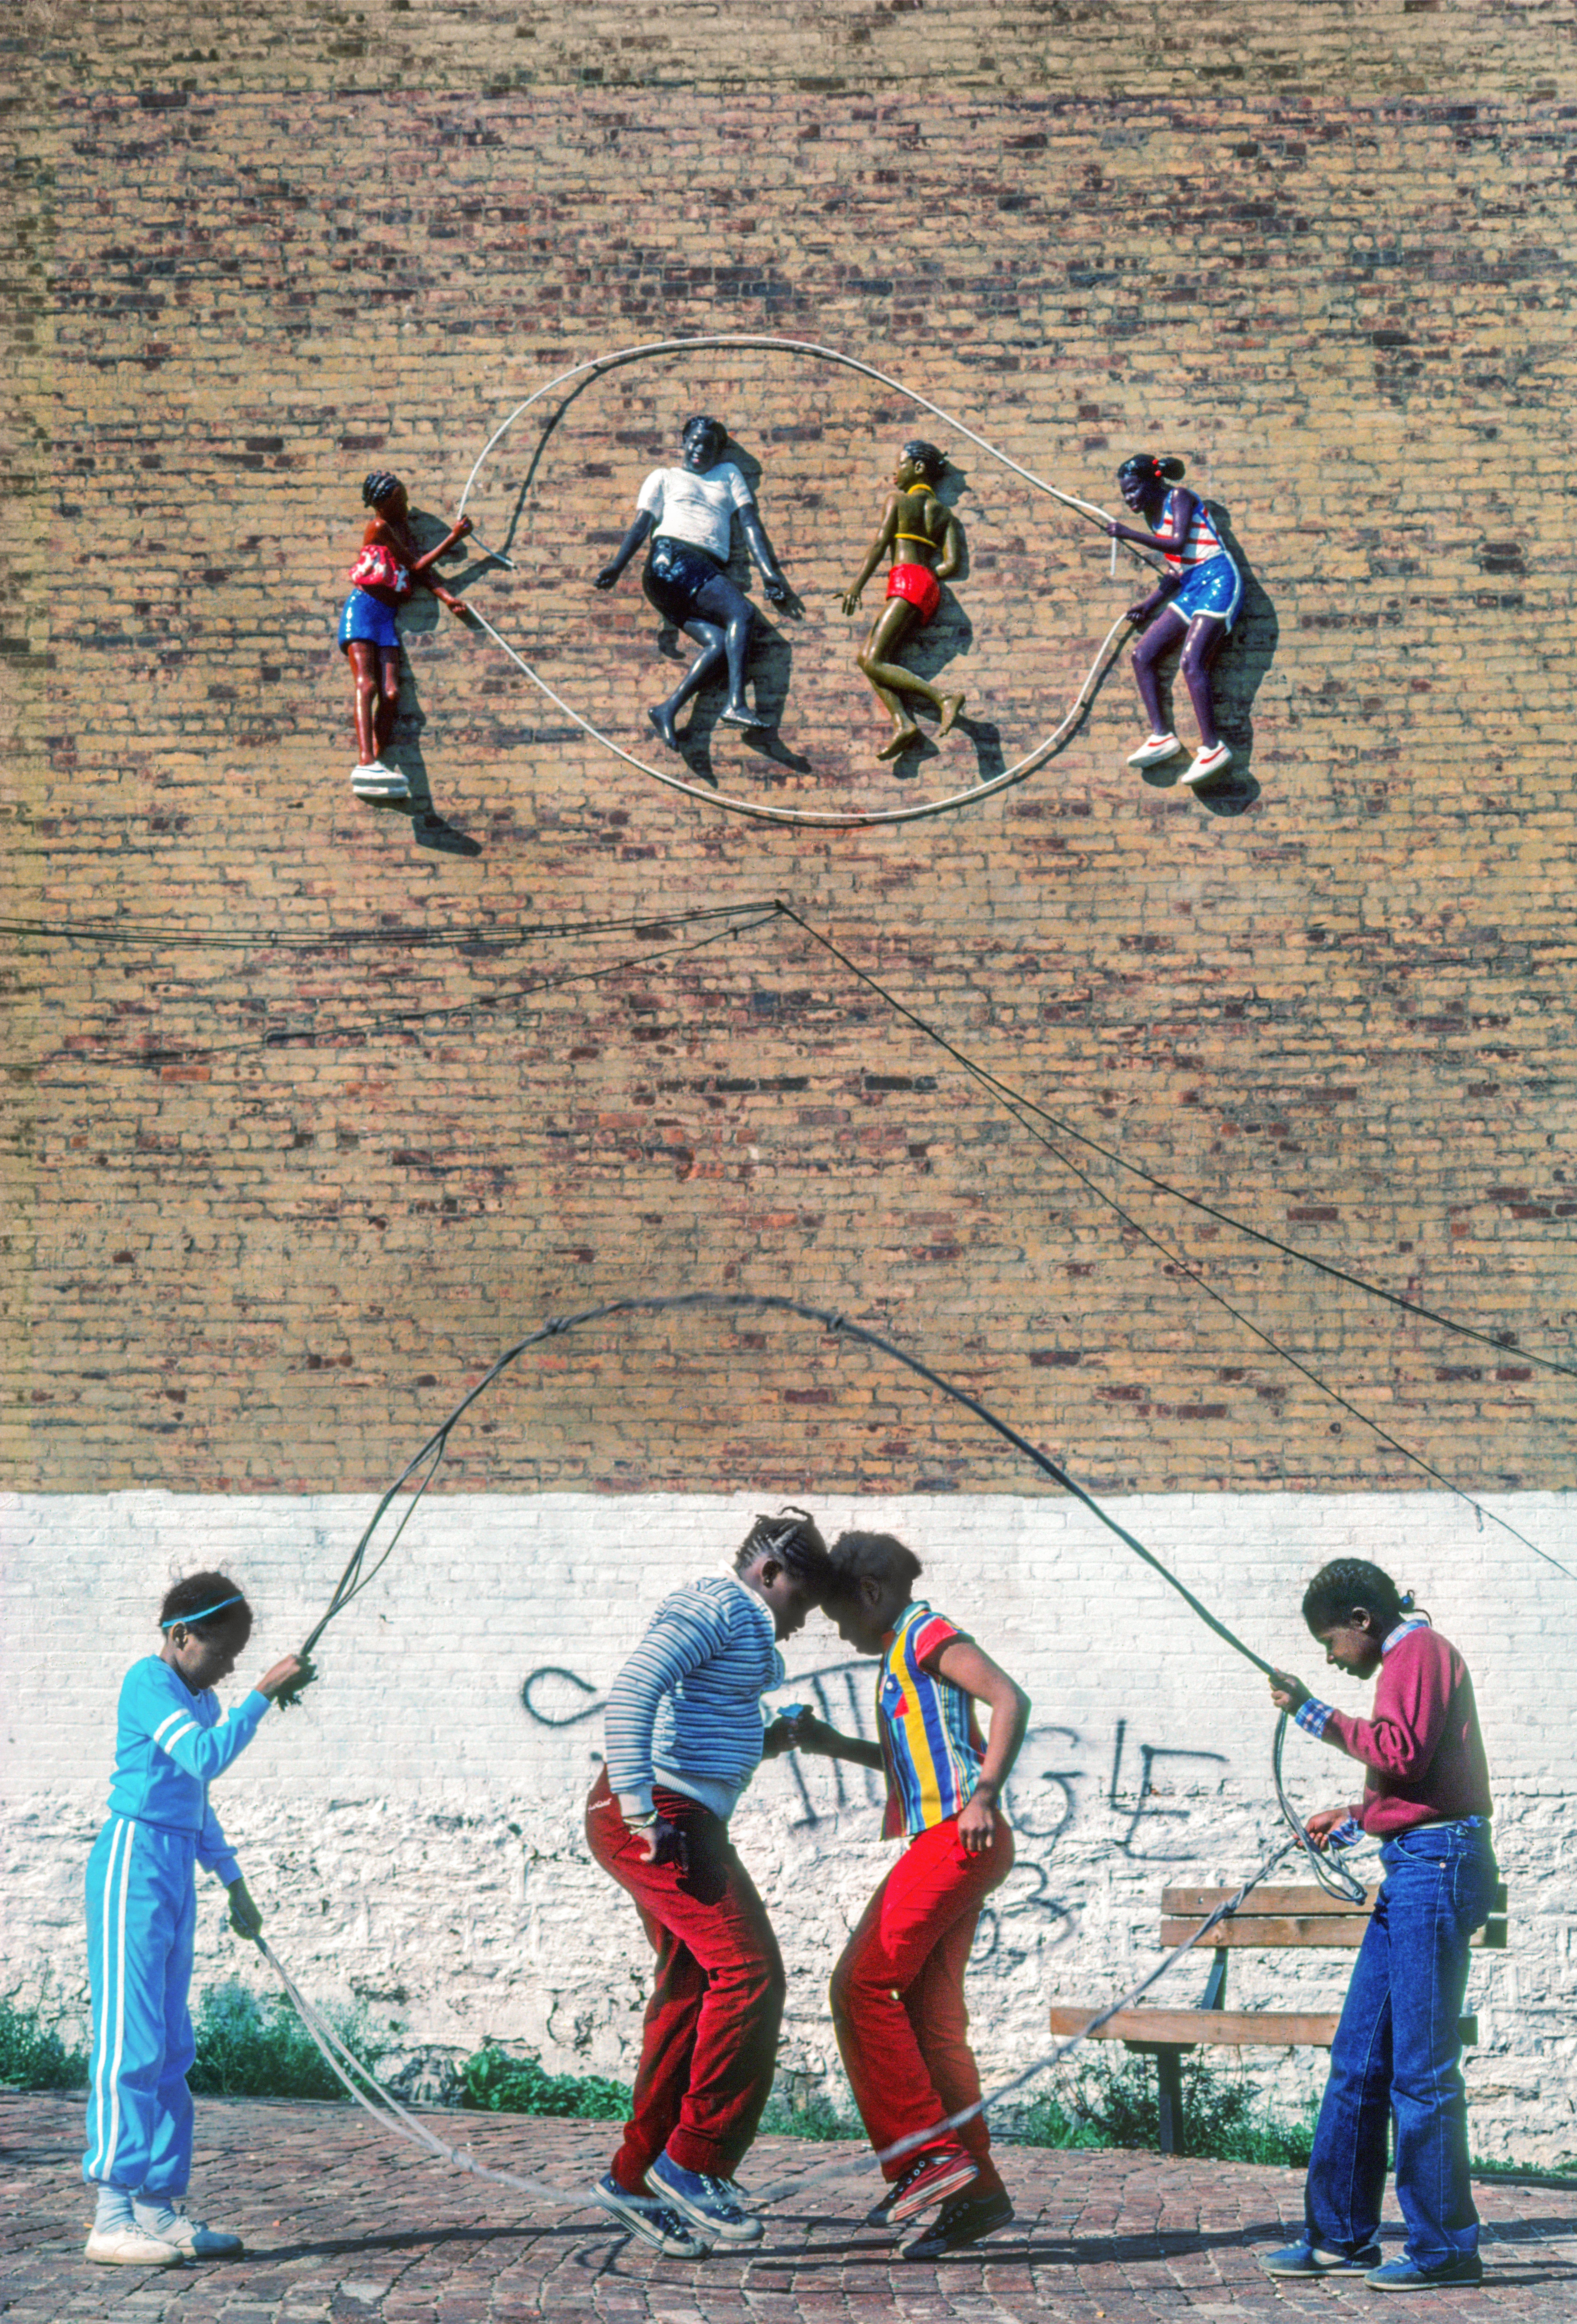 [left to right] : La Free da Mincey, Javette Potts, Tawana Brown, and Staice Seabrine recreate their roles in Double Dutch, which is located on their apartment building, Kelly Street, Bronx, 1982. © Martha Cooper